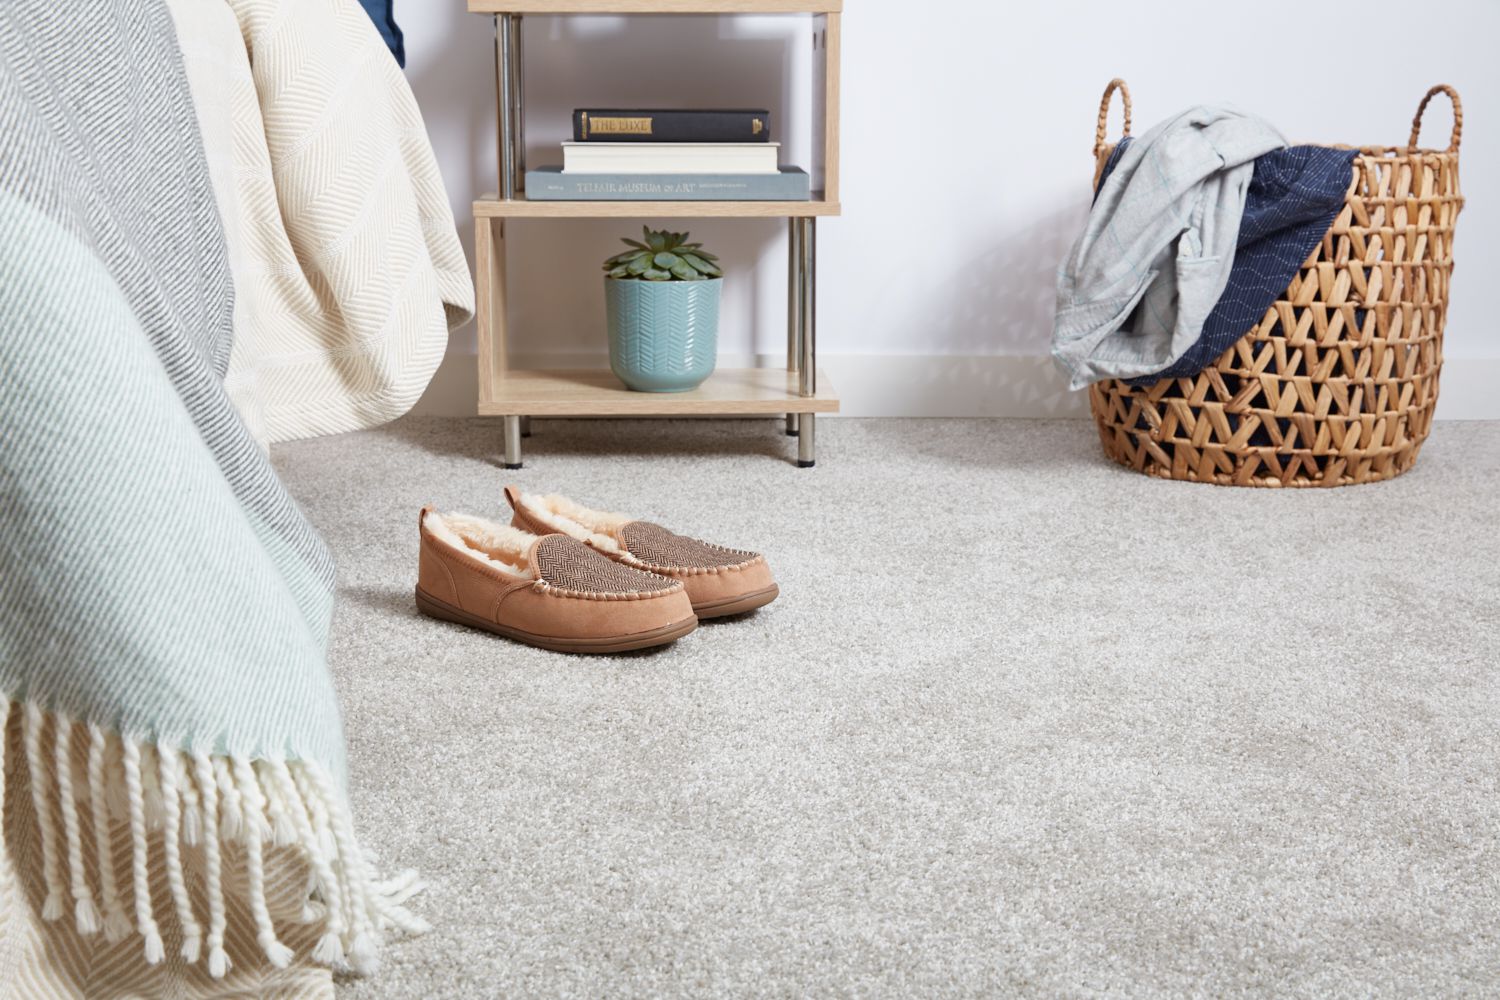 Why Carpet Is the Better Choice Over Hardwood